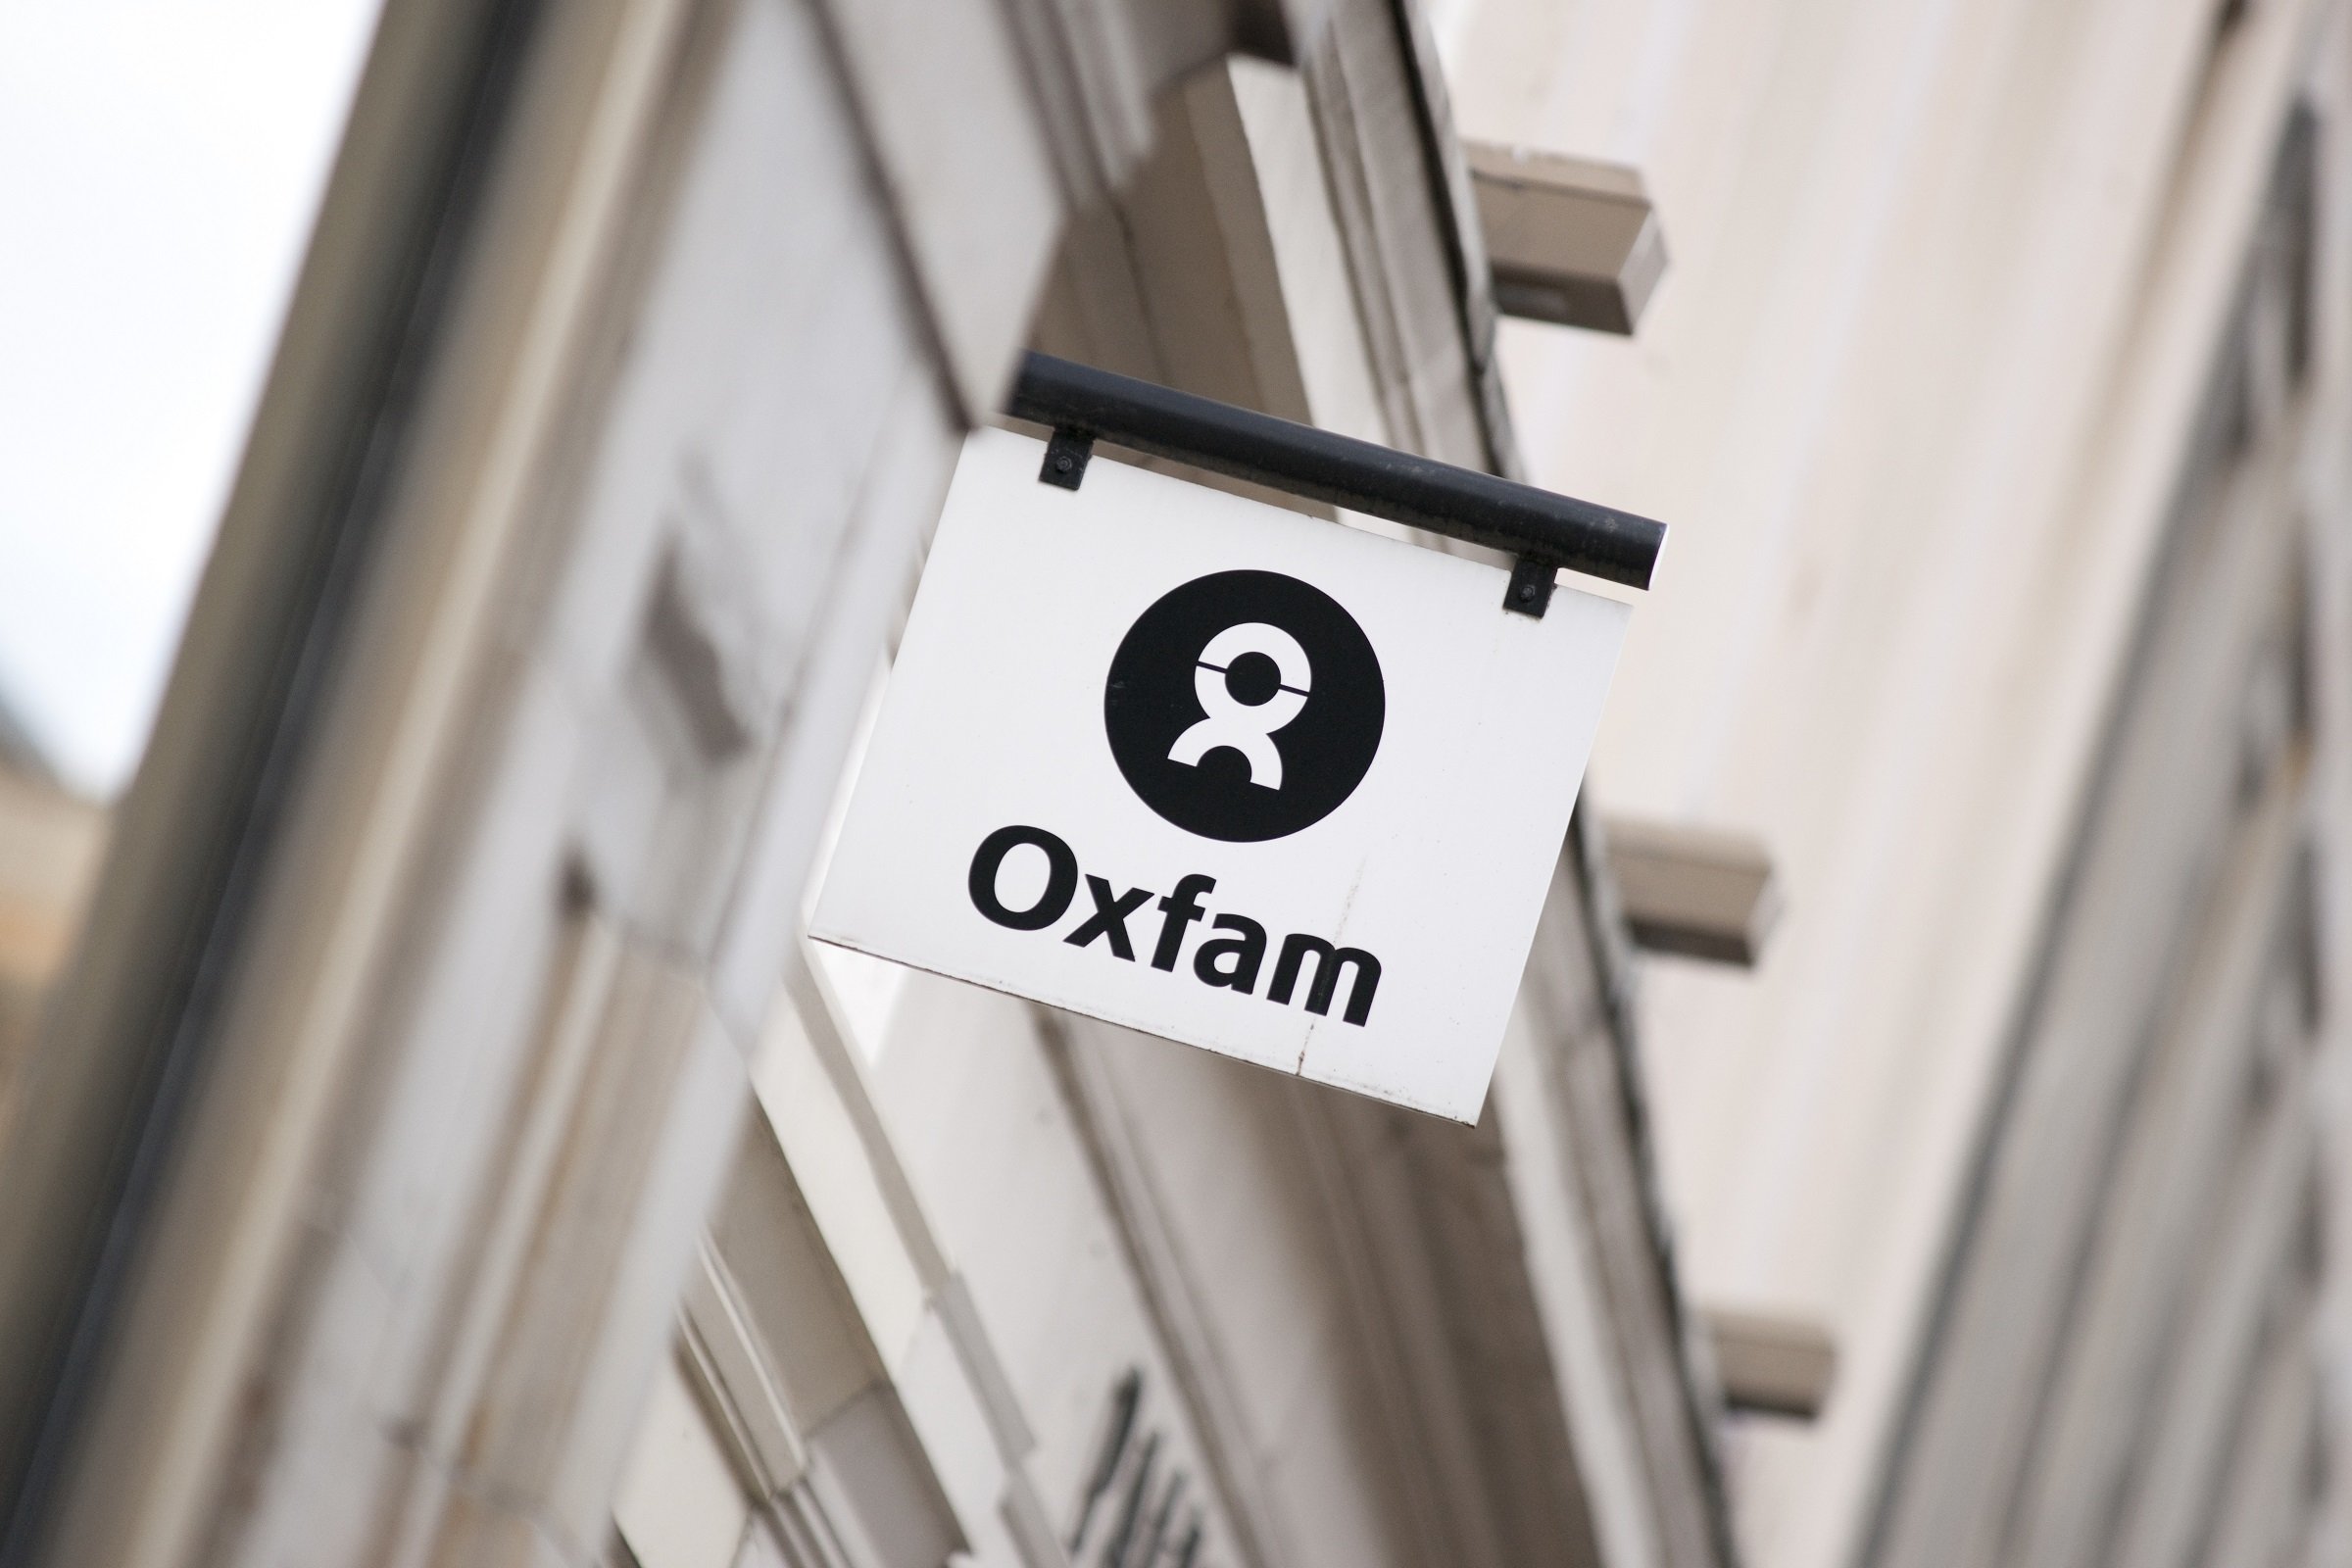 Oxfam and the UK’s moral leadership